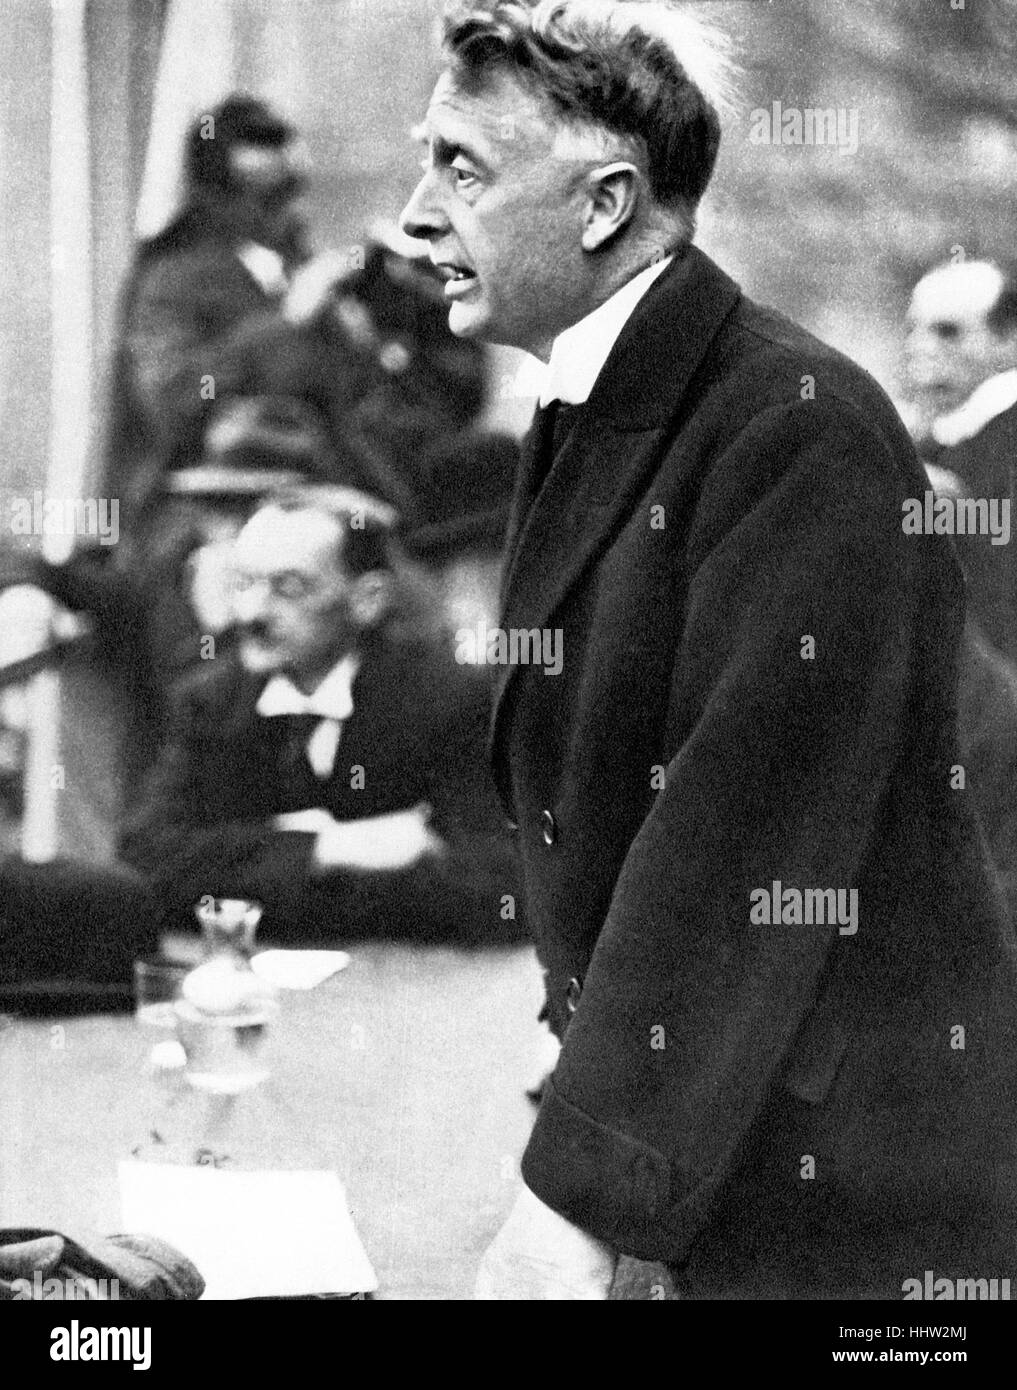 William Thomas Cosgrave, (6 June 1880 – 16 November 1965) Irish politician who became Chairman of the Provisional Government of Stock Photo